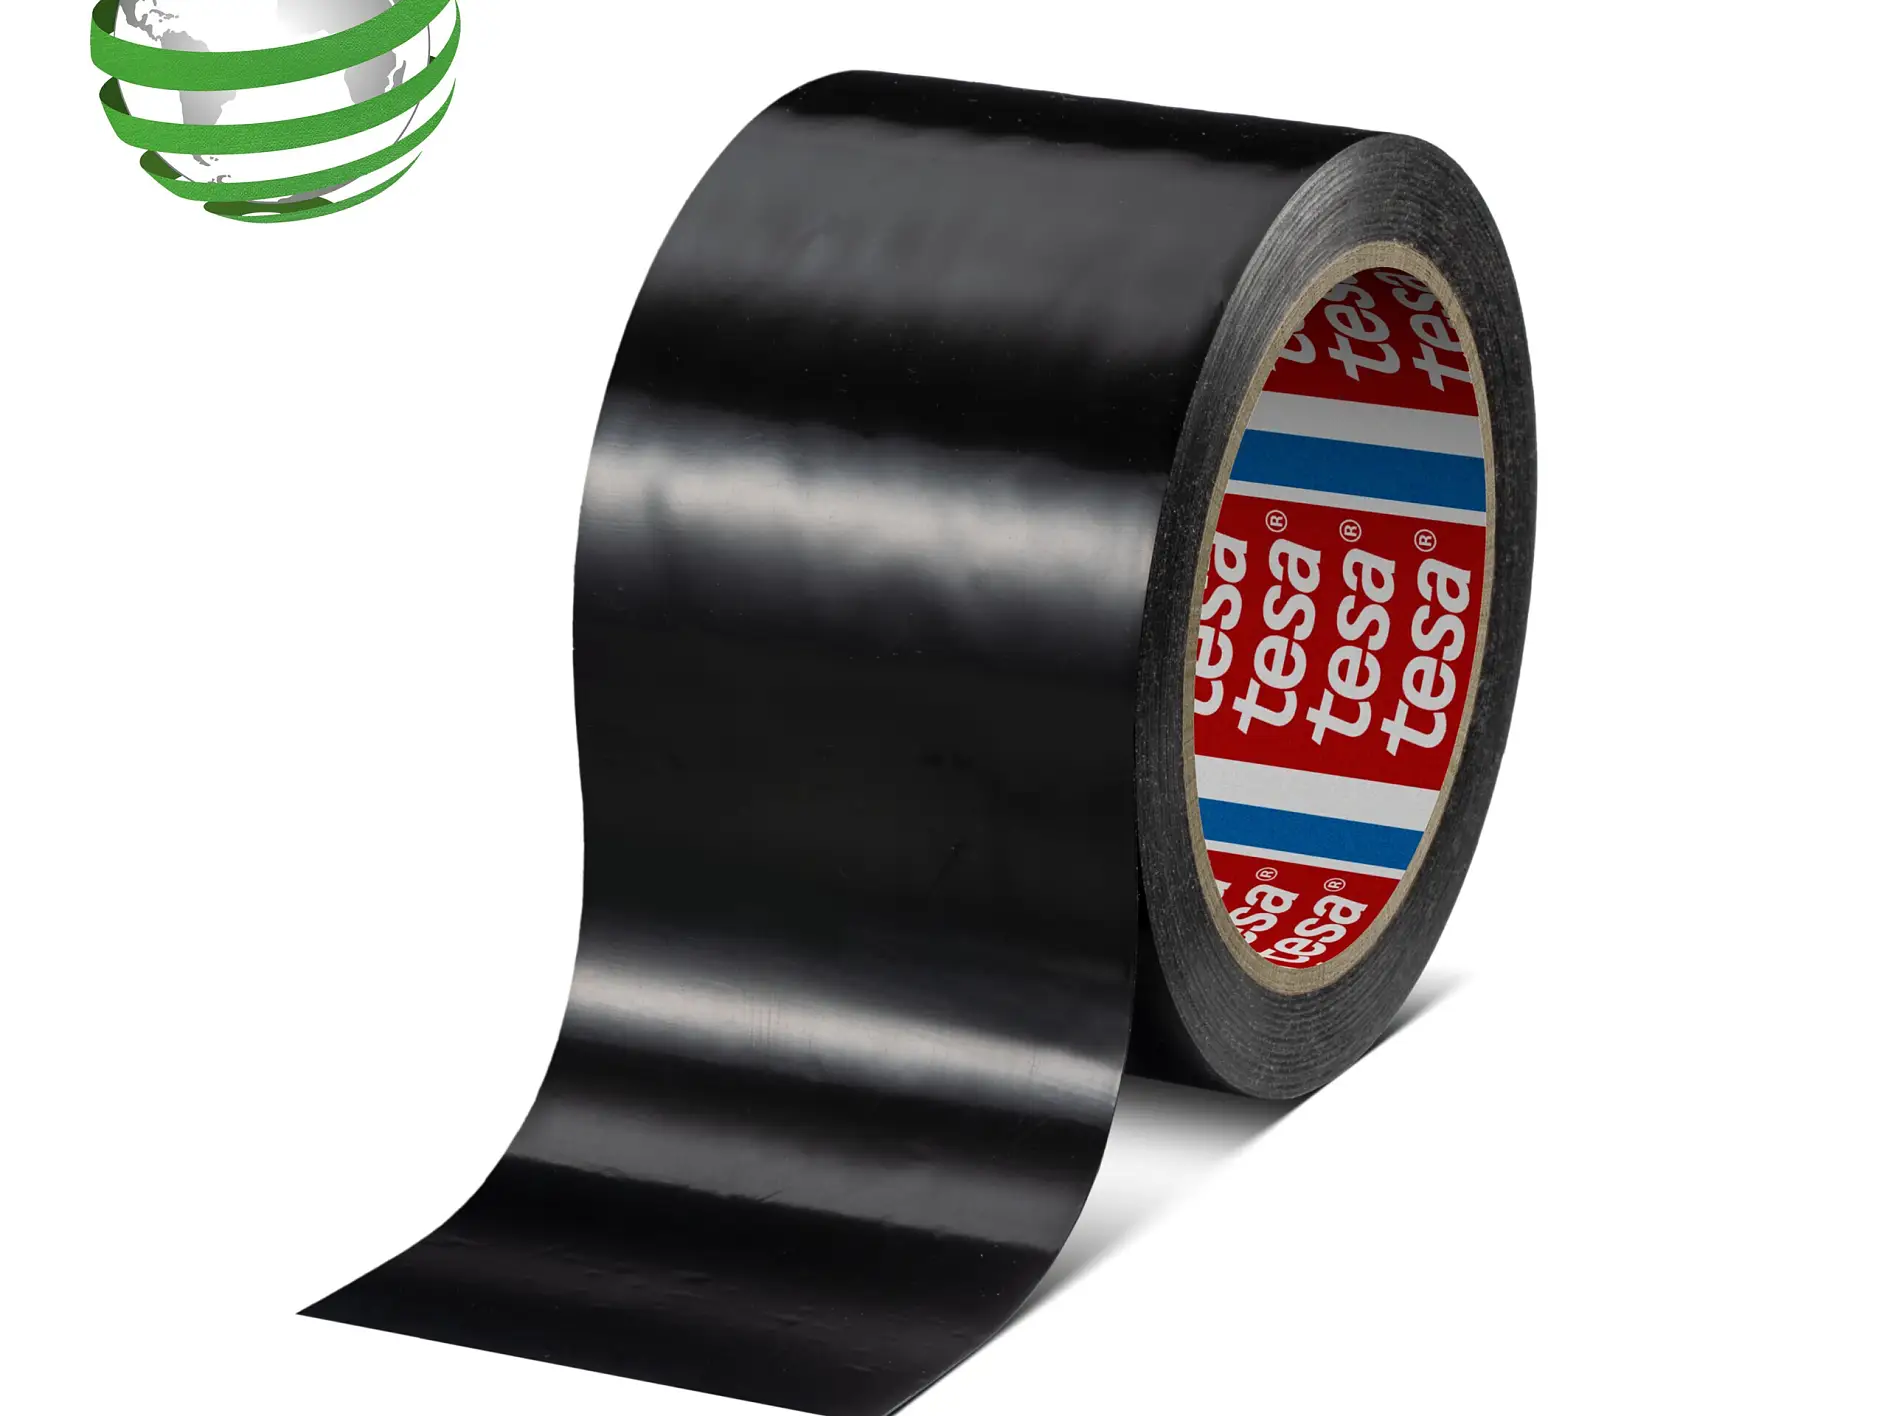 tesa-04648-repairing-tape-for-silage-cover-films-black-04648-00001-00-pr-with-marker